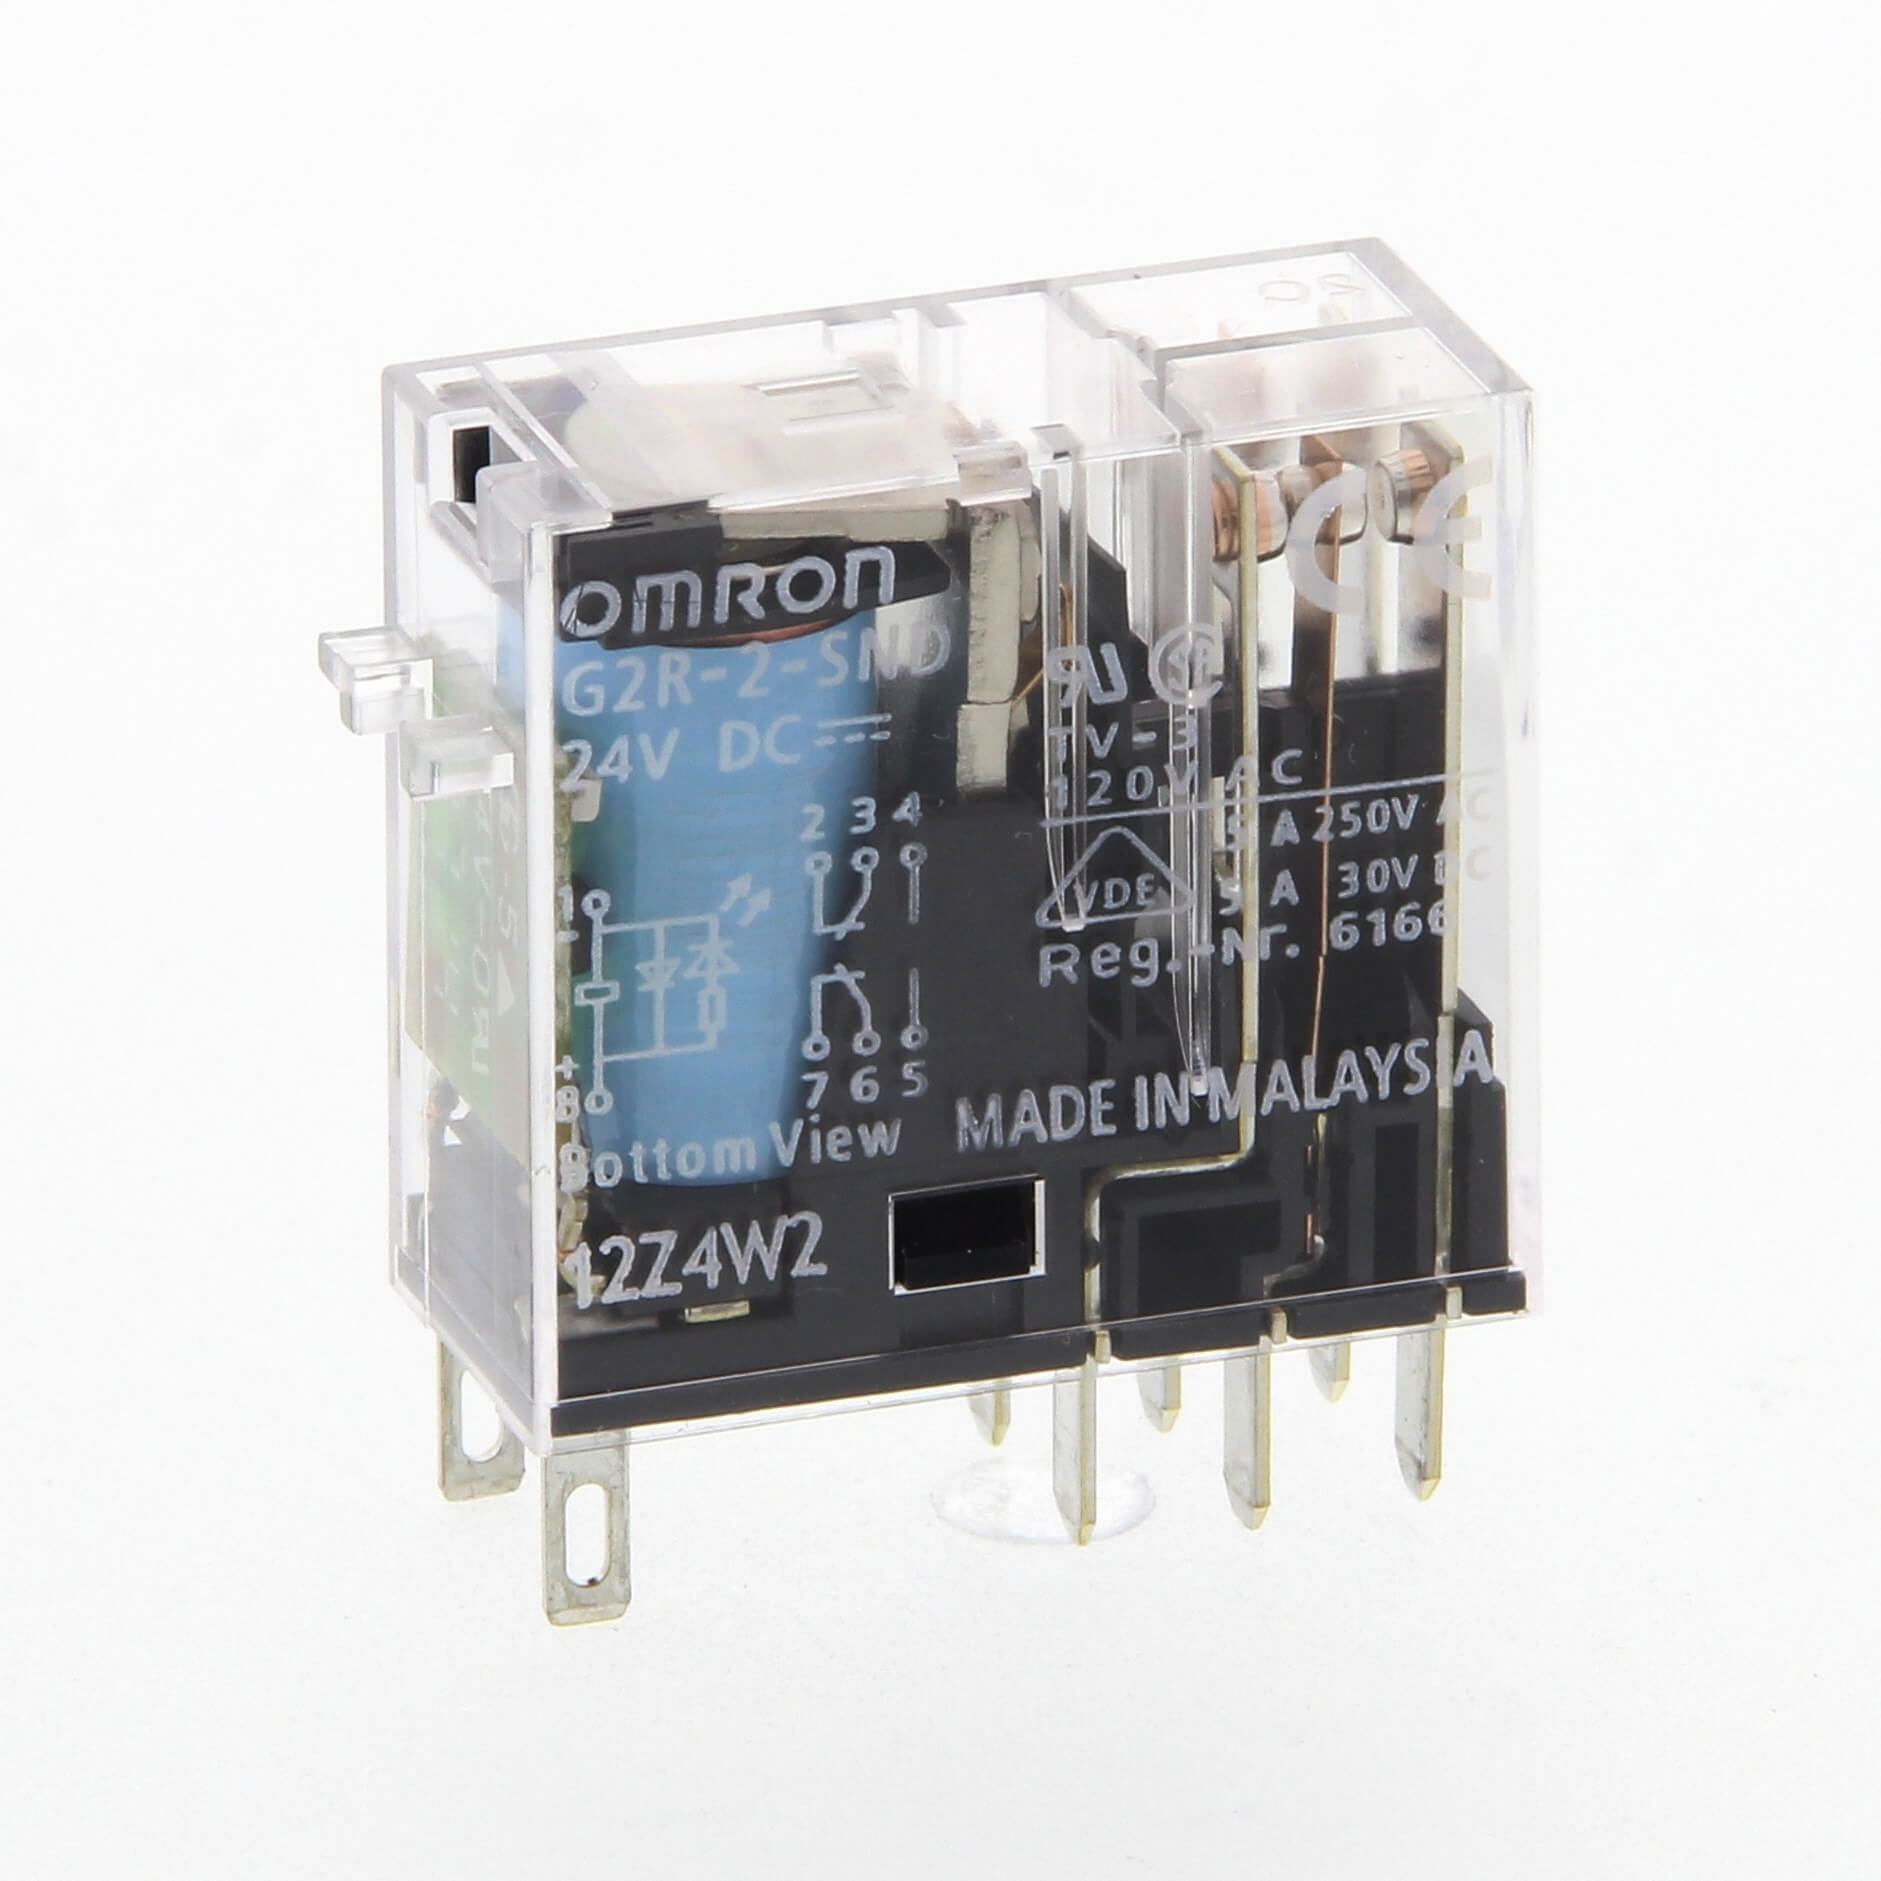 G2R-2-SND 24DC(S) | OMRON, Europe